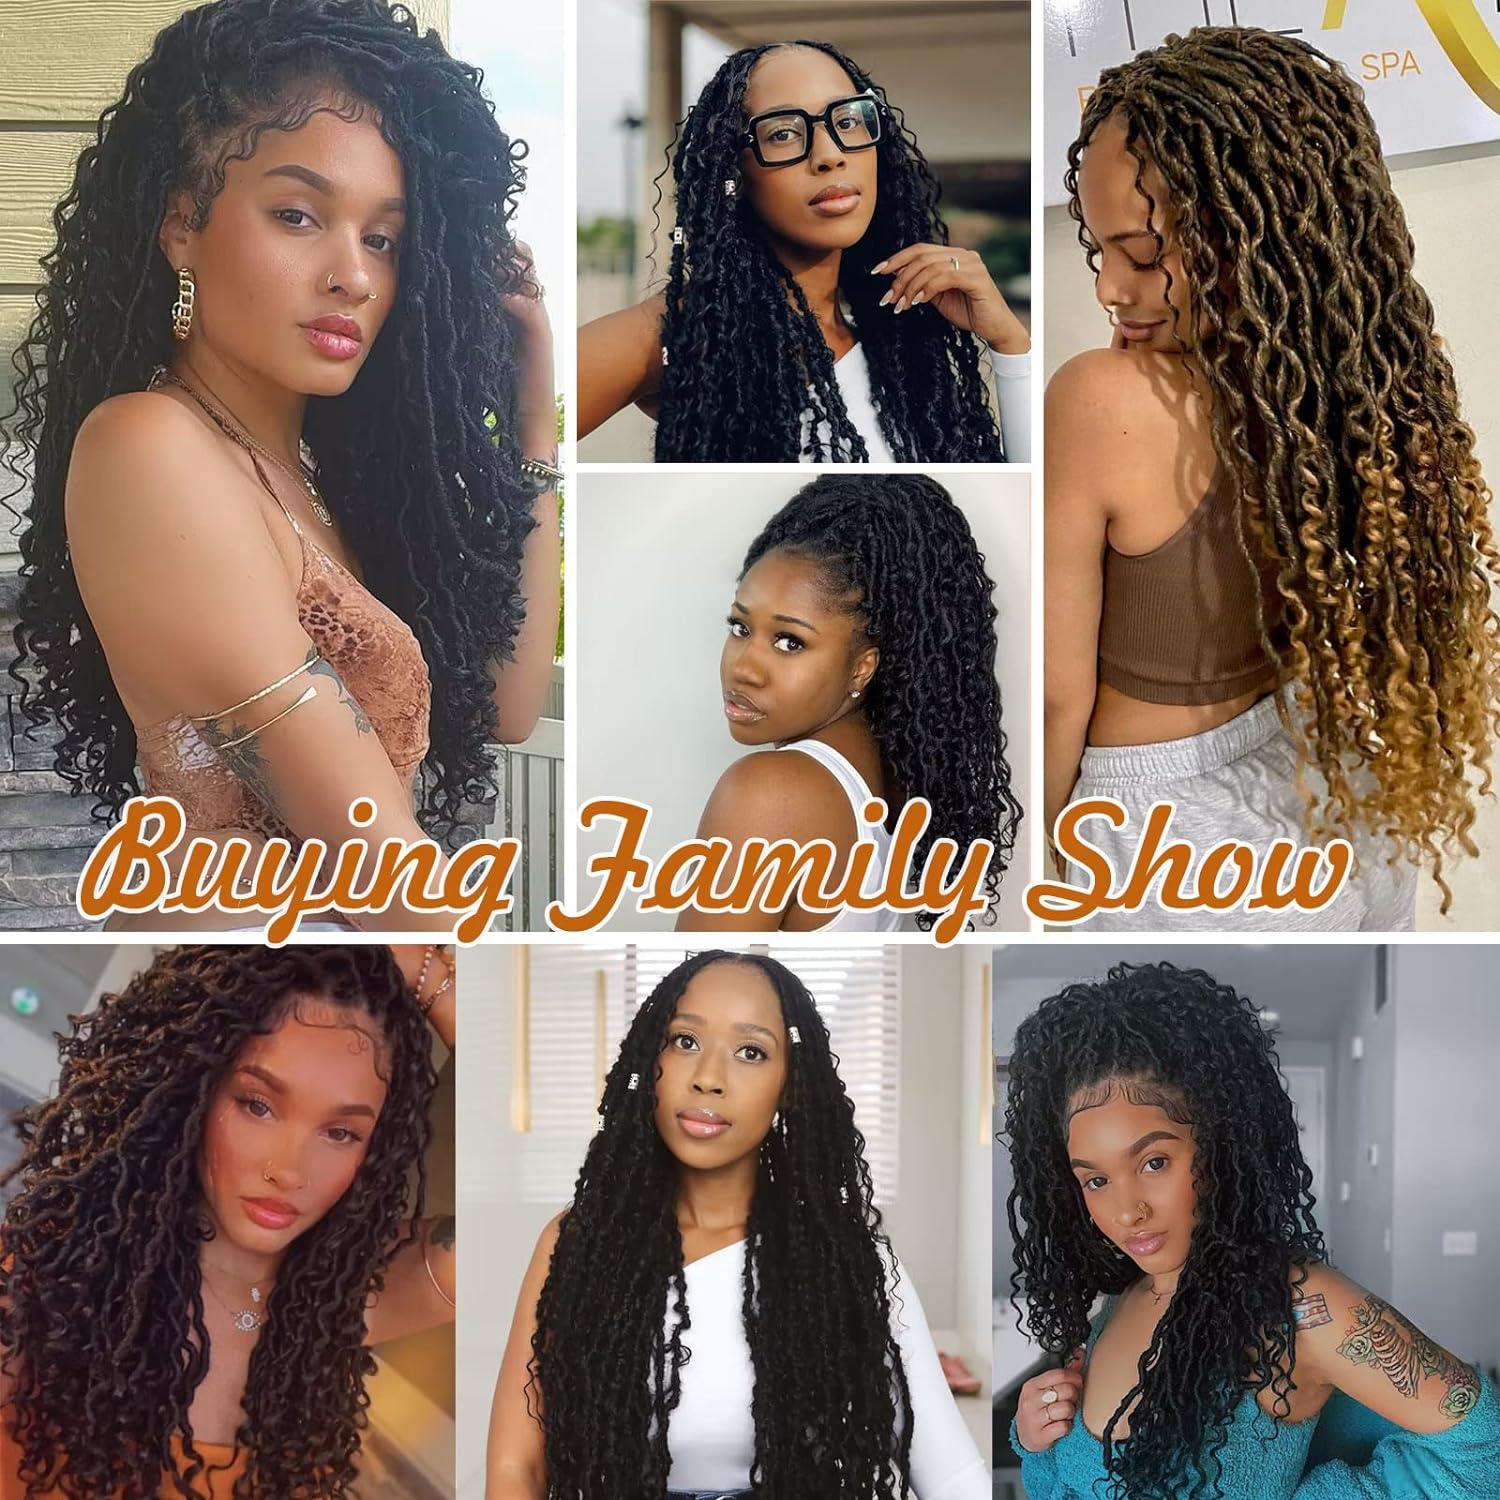 Curly Crochet Braids (Natural-looking)